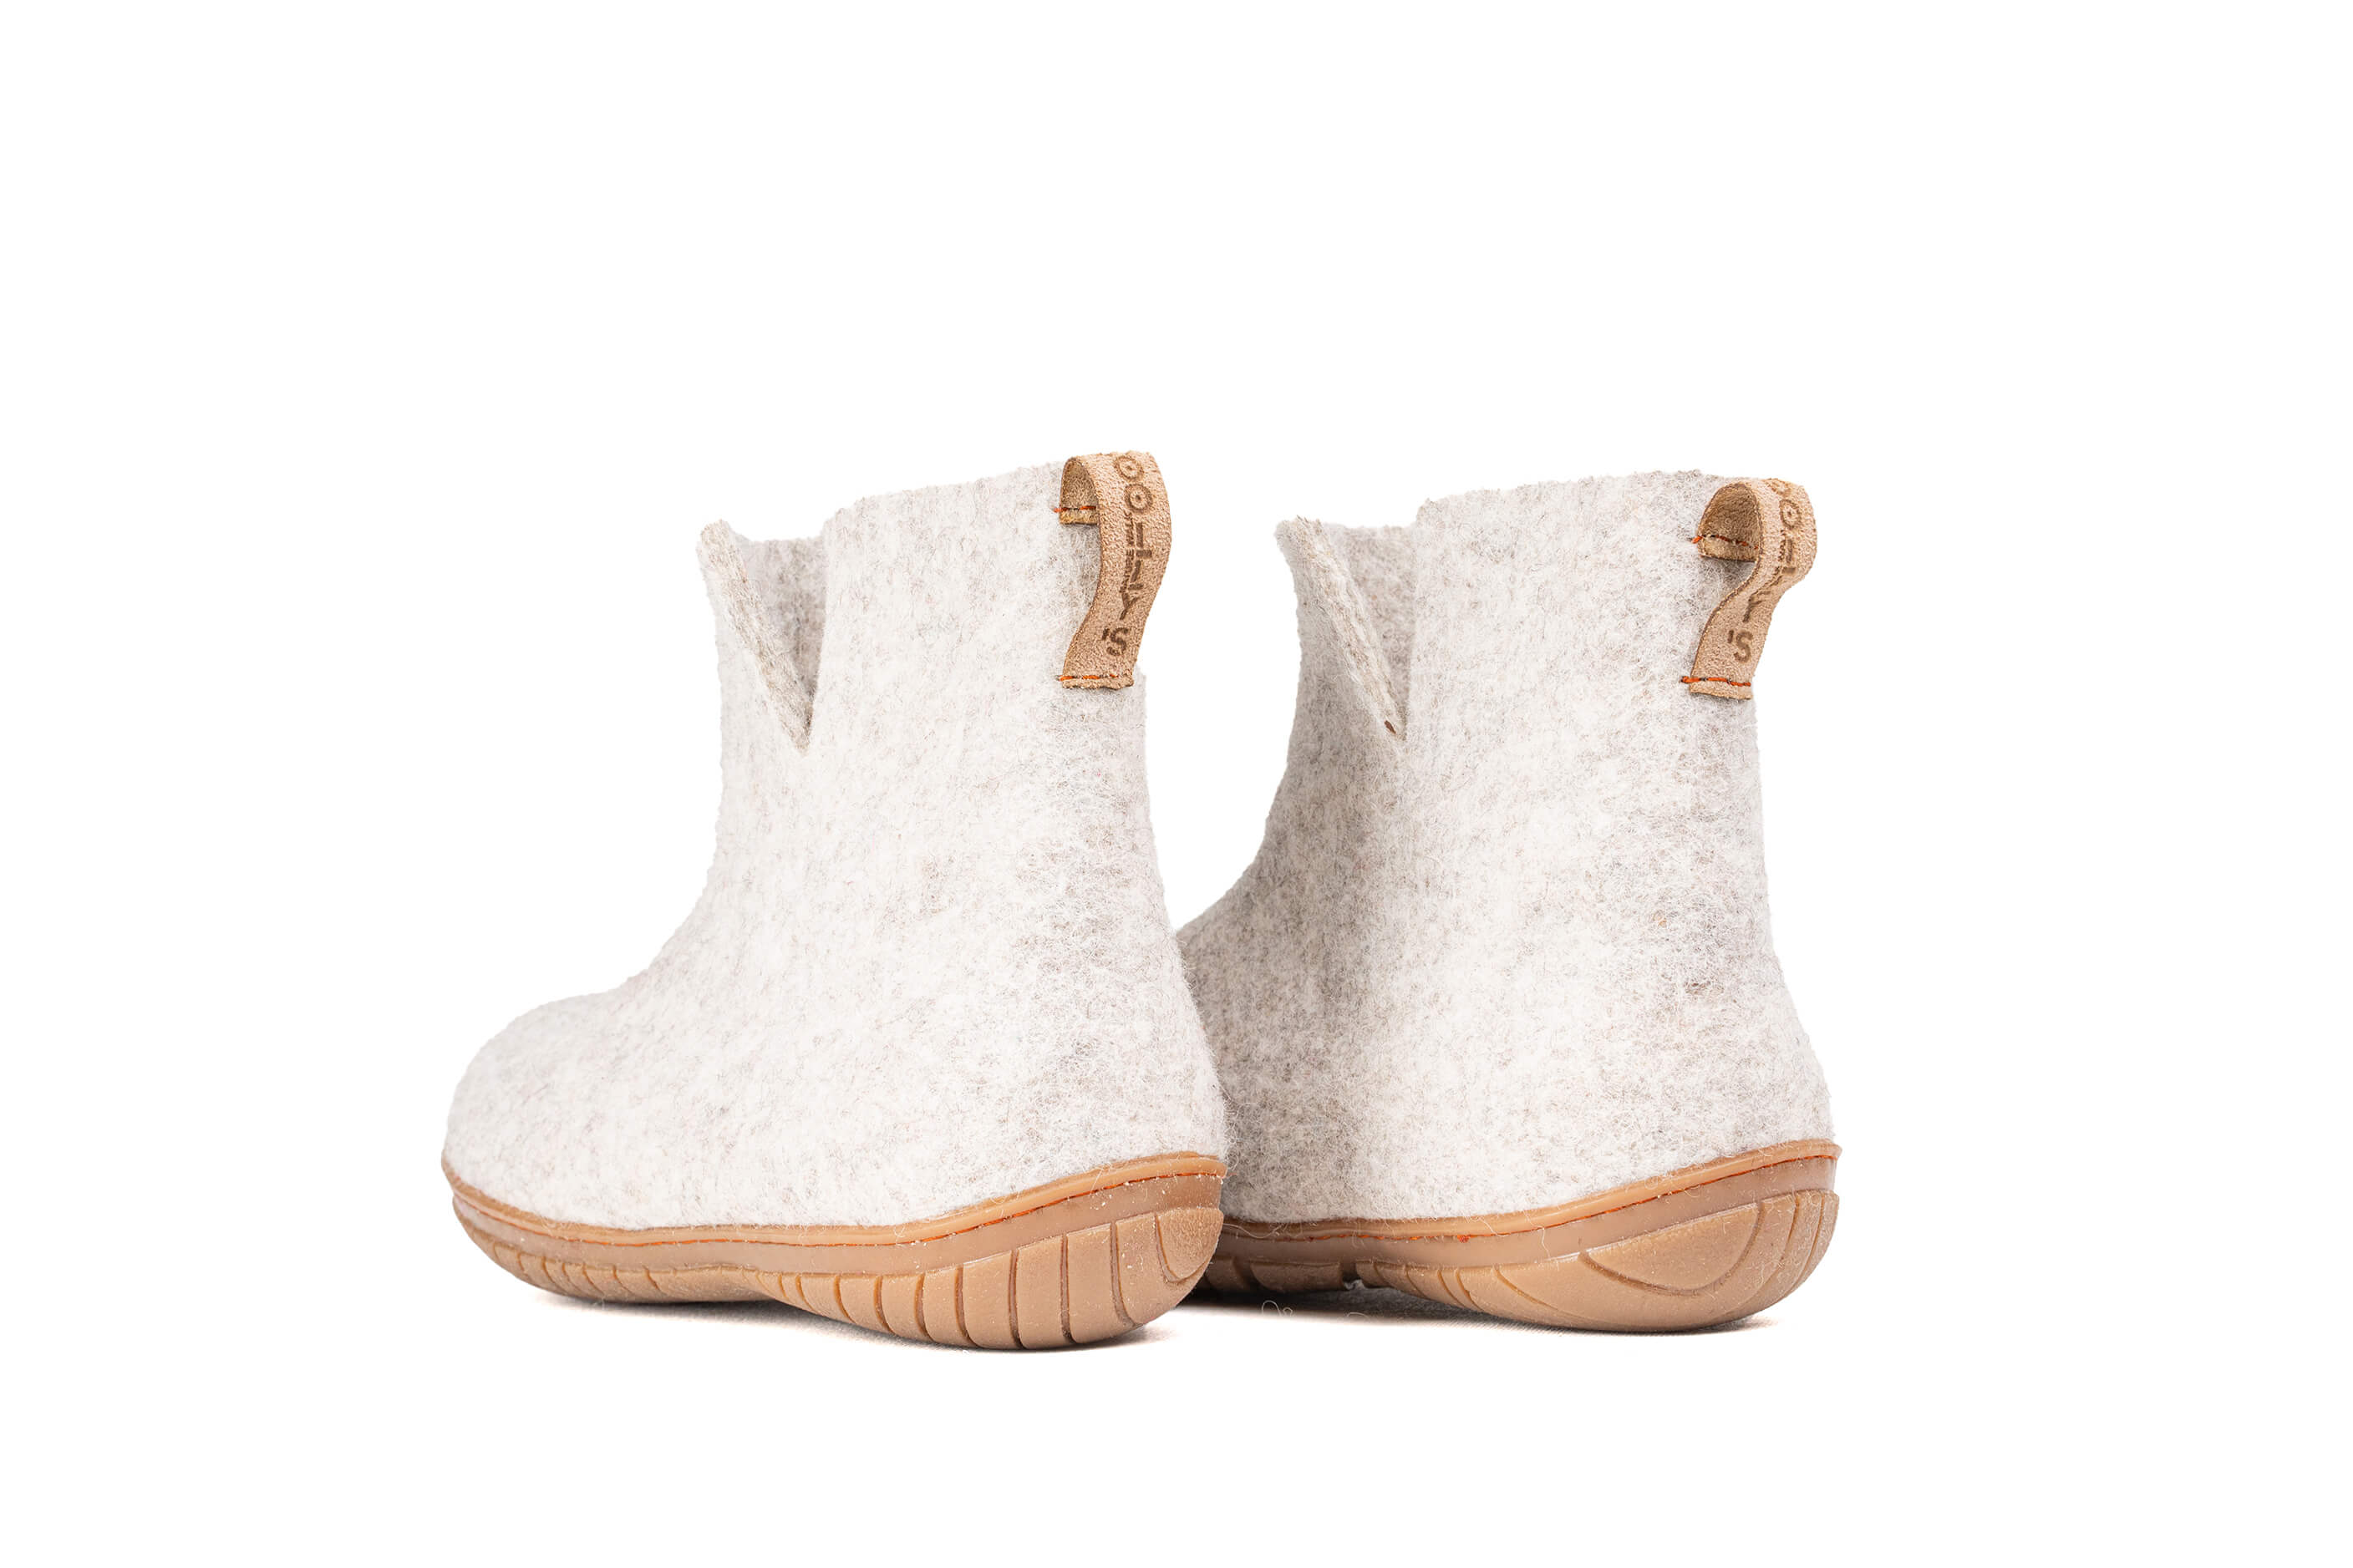 Outdoor Low Boots With Rubber Sole - Light Brown